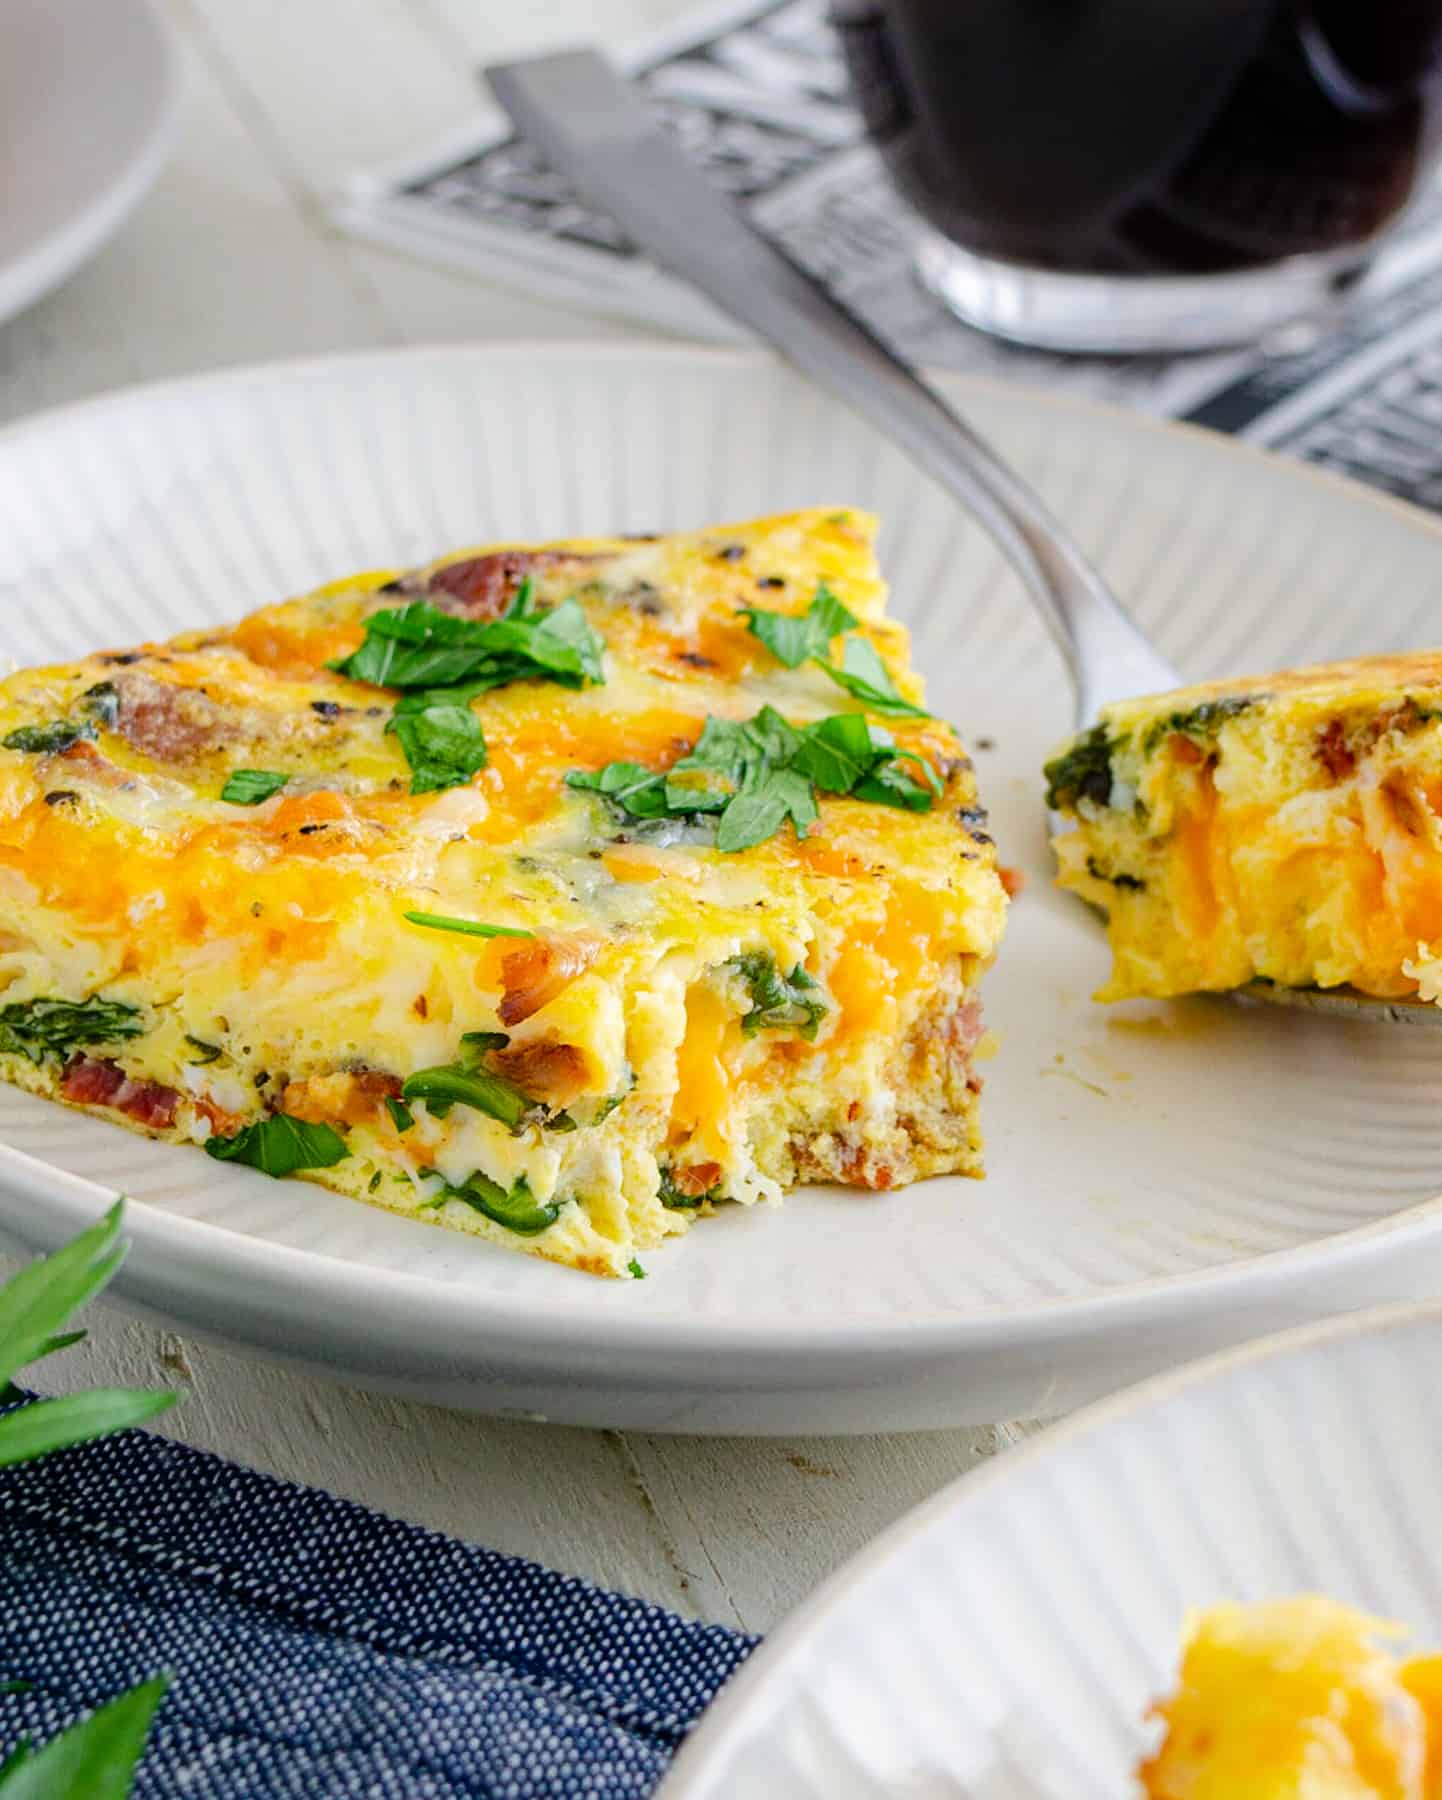 A slice of baked frittata on a plate with a bite out of it showing the beautiful cheese, spinach, and bacon inside.